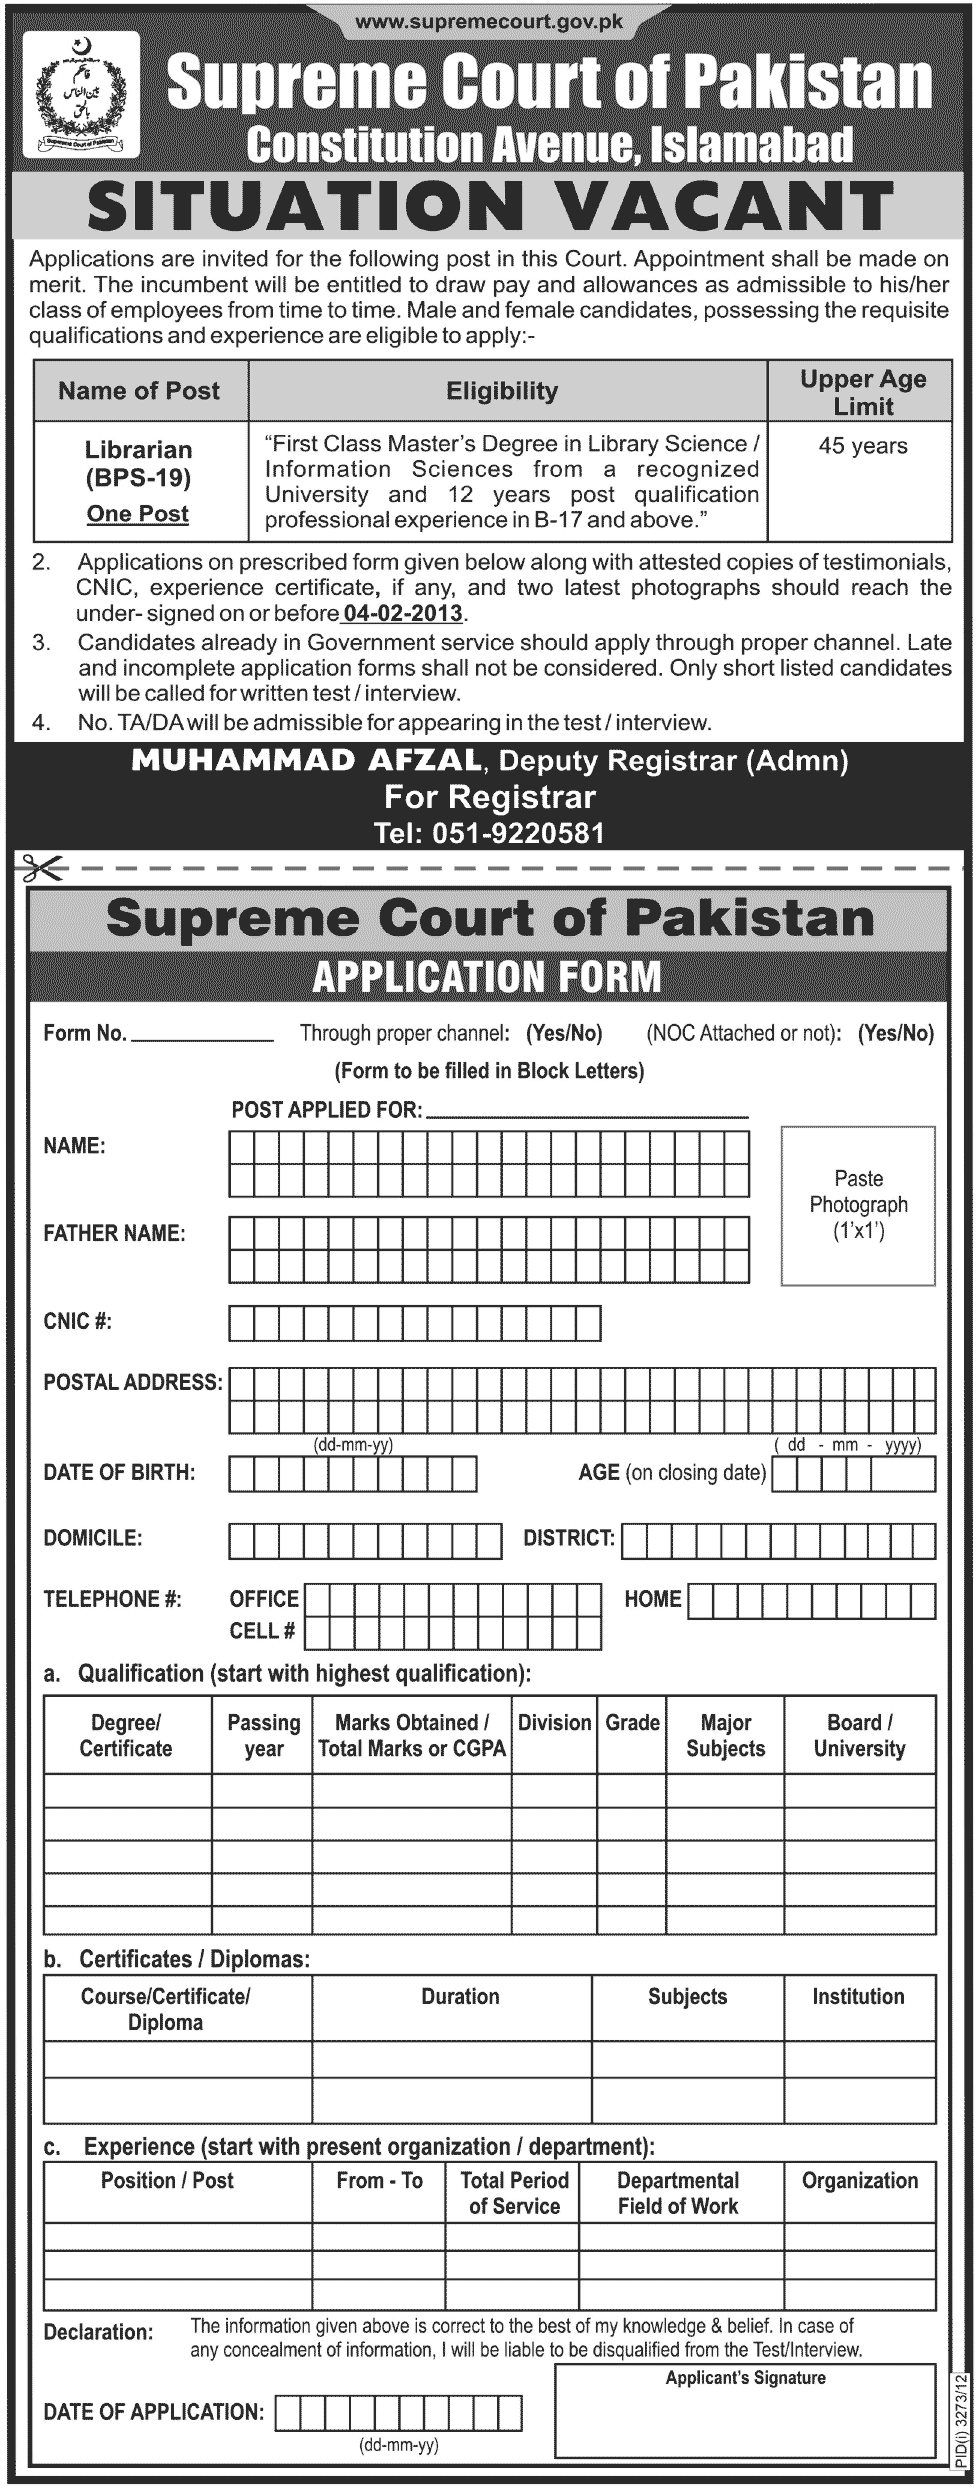 Supreme Court of Pakistan Job 2013 in Islamabad for Librarian with Application Form